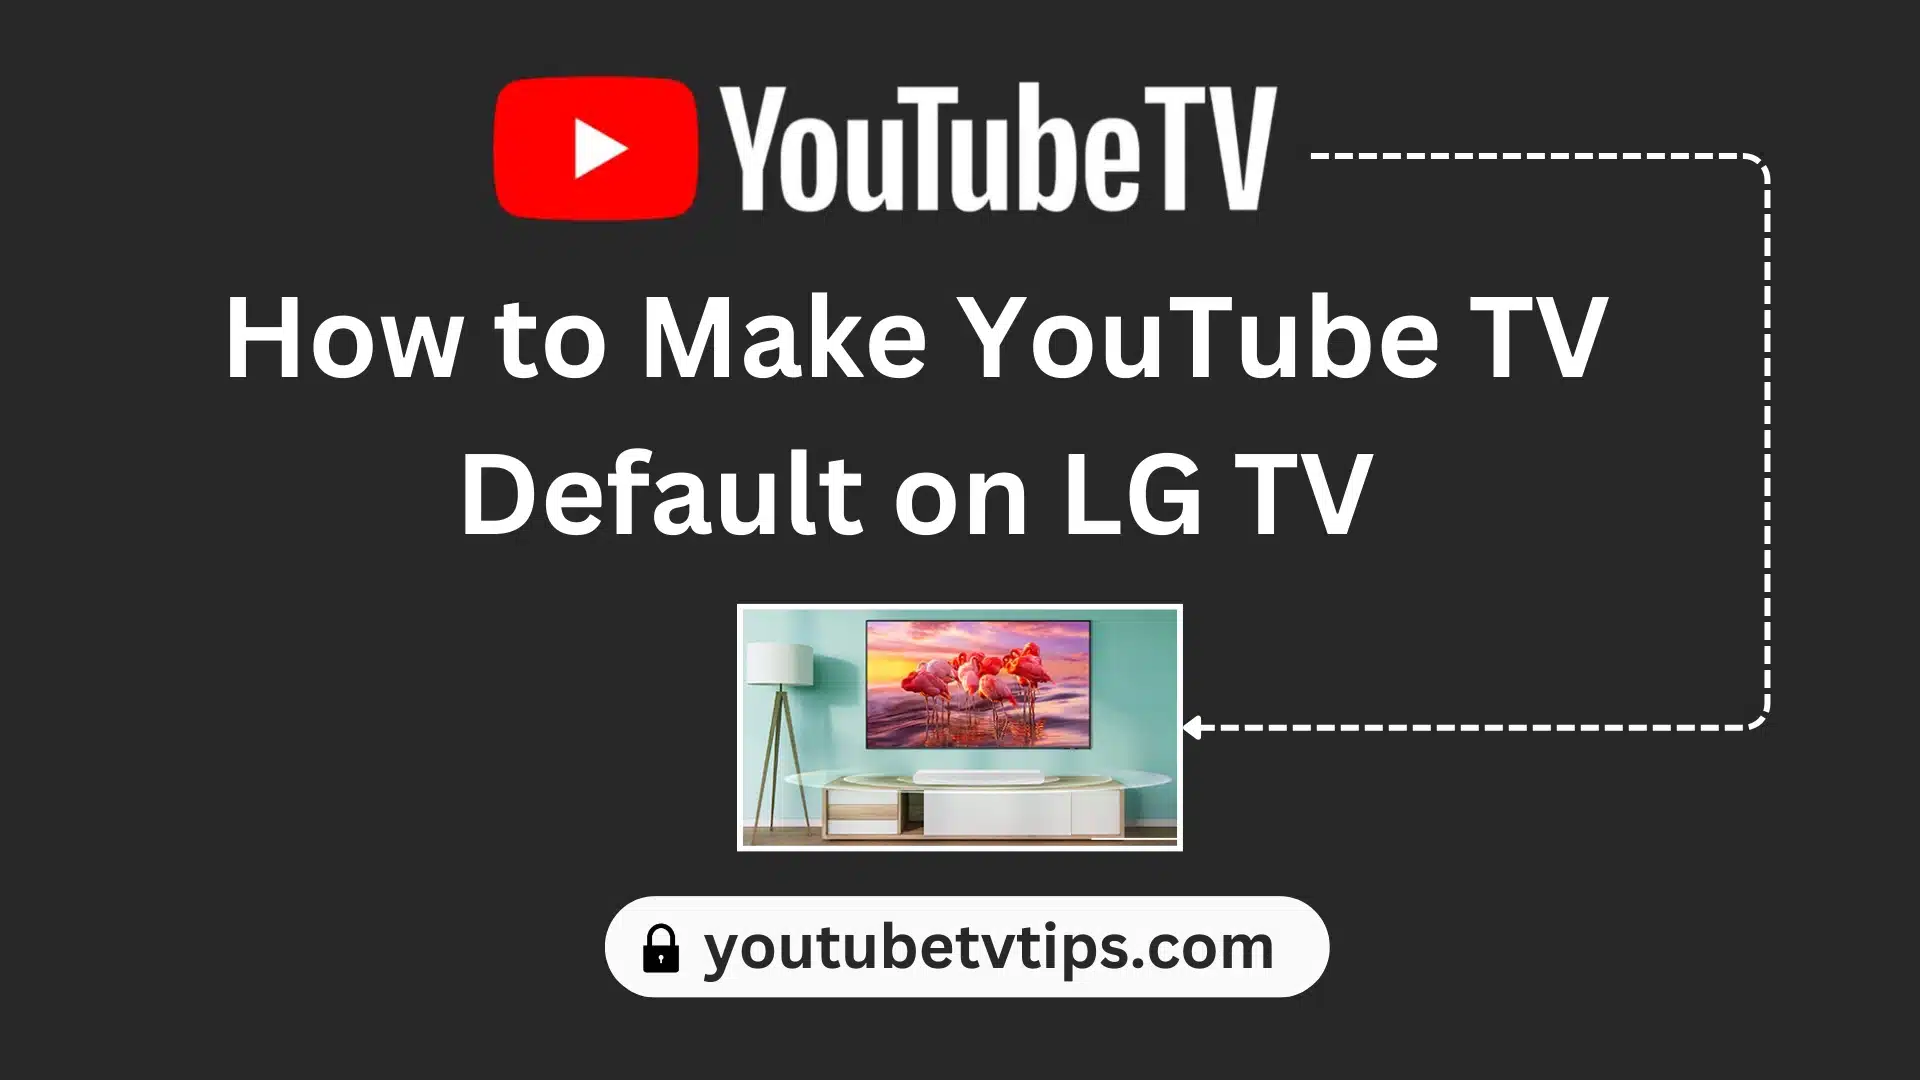 How to Make YouTube TV Default on LG TV